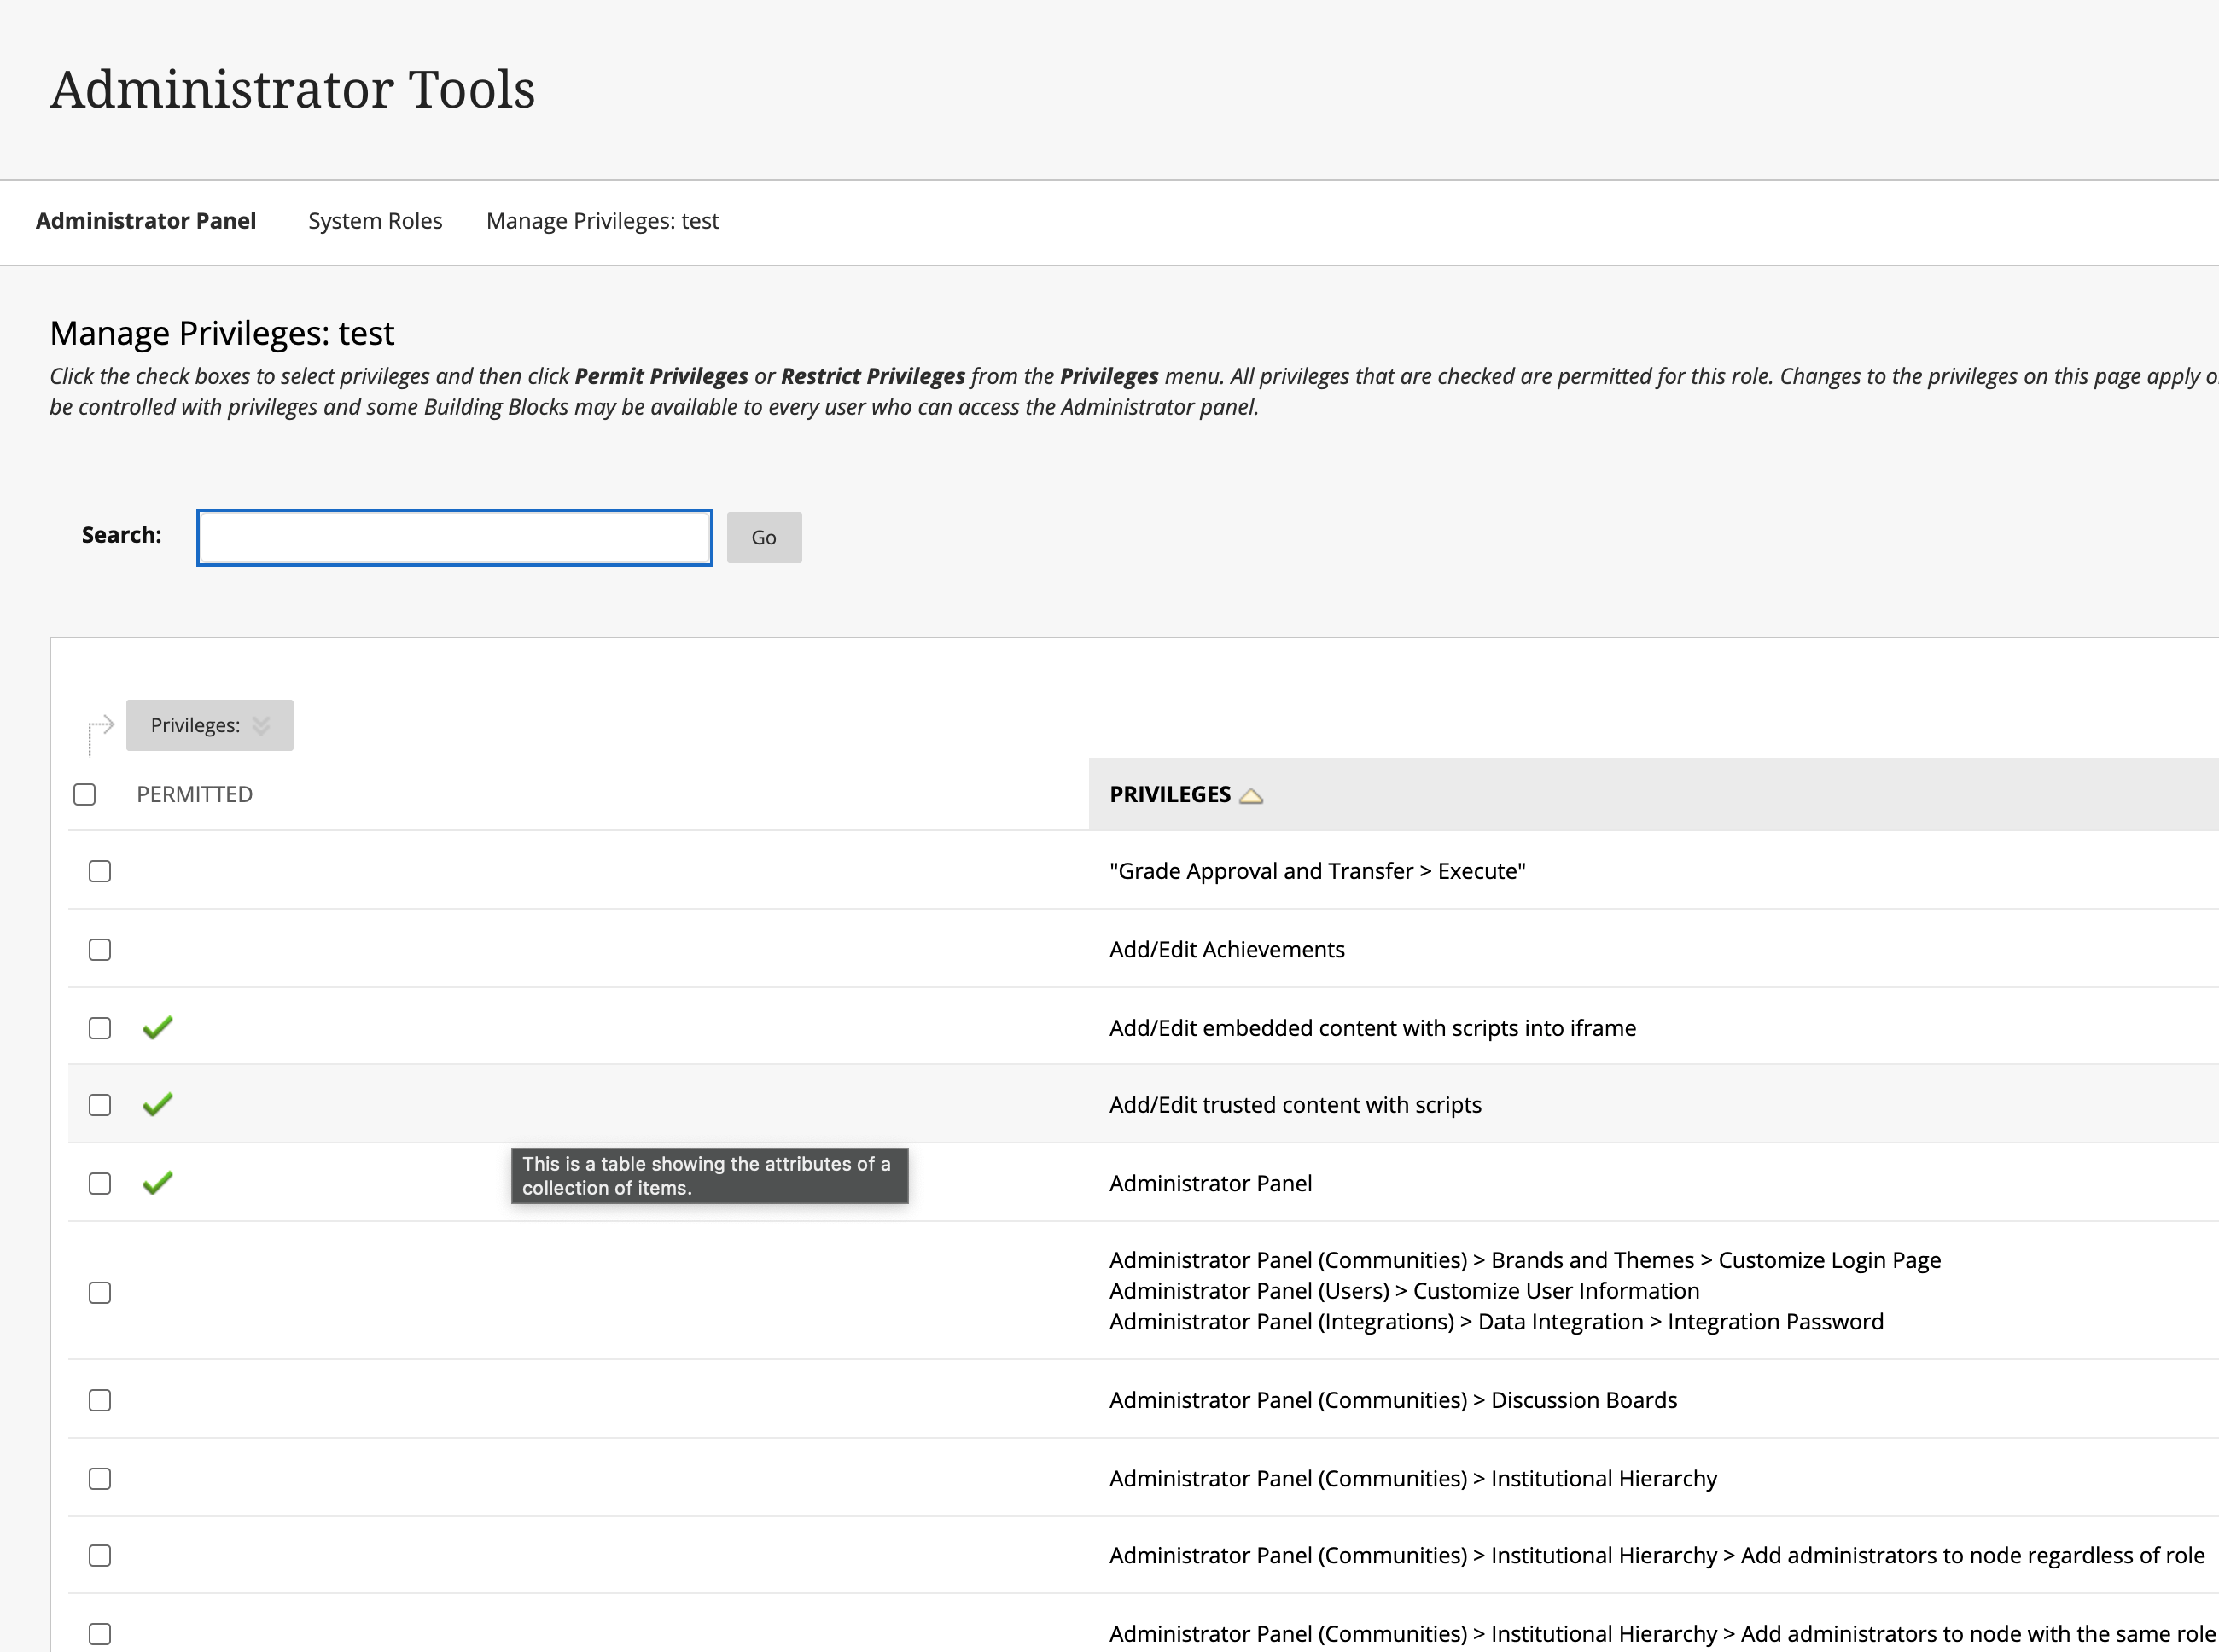 a screen shot of system role privileges before running the bookmarklet